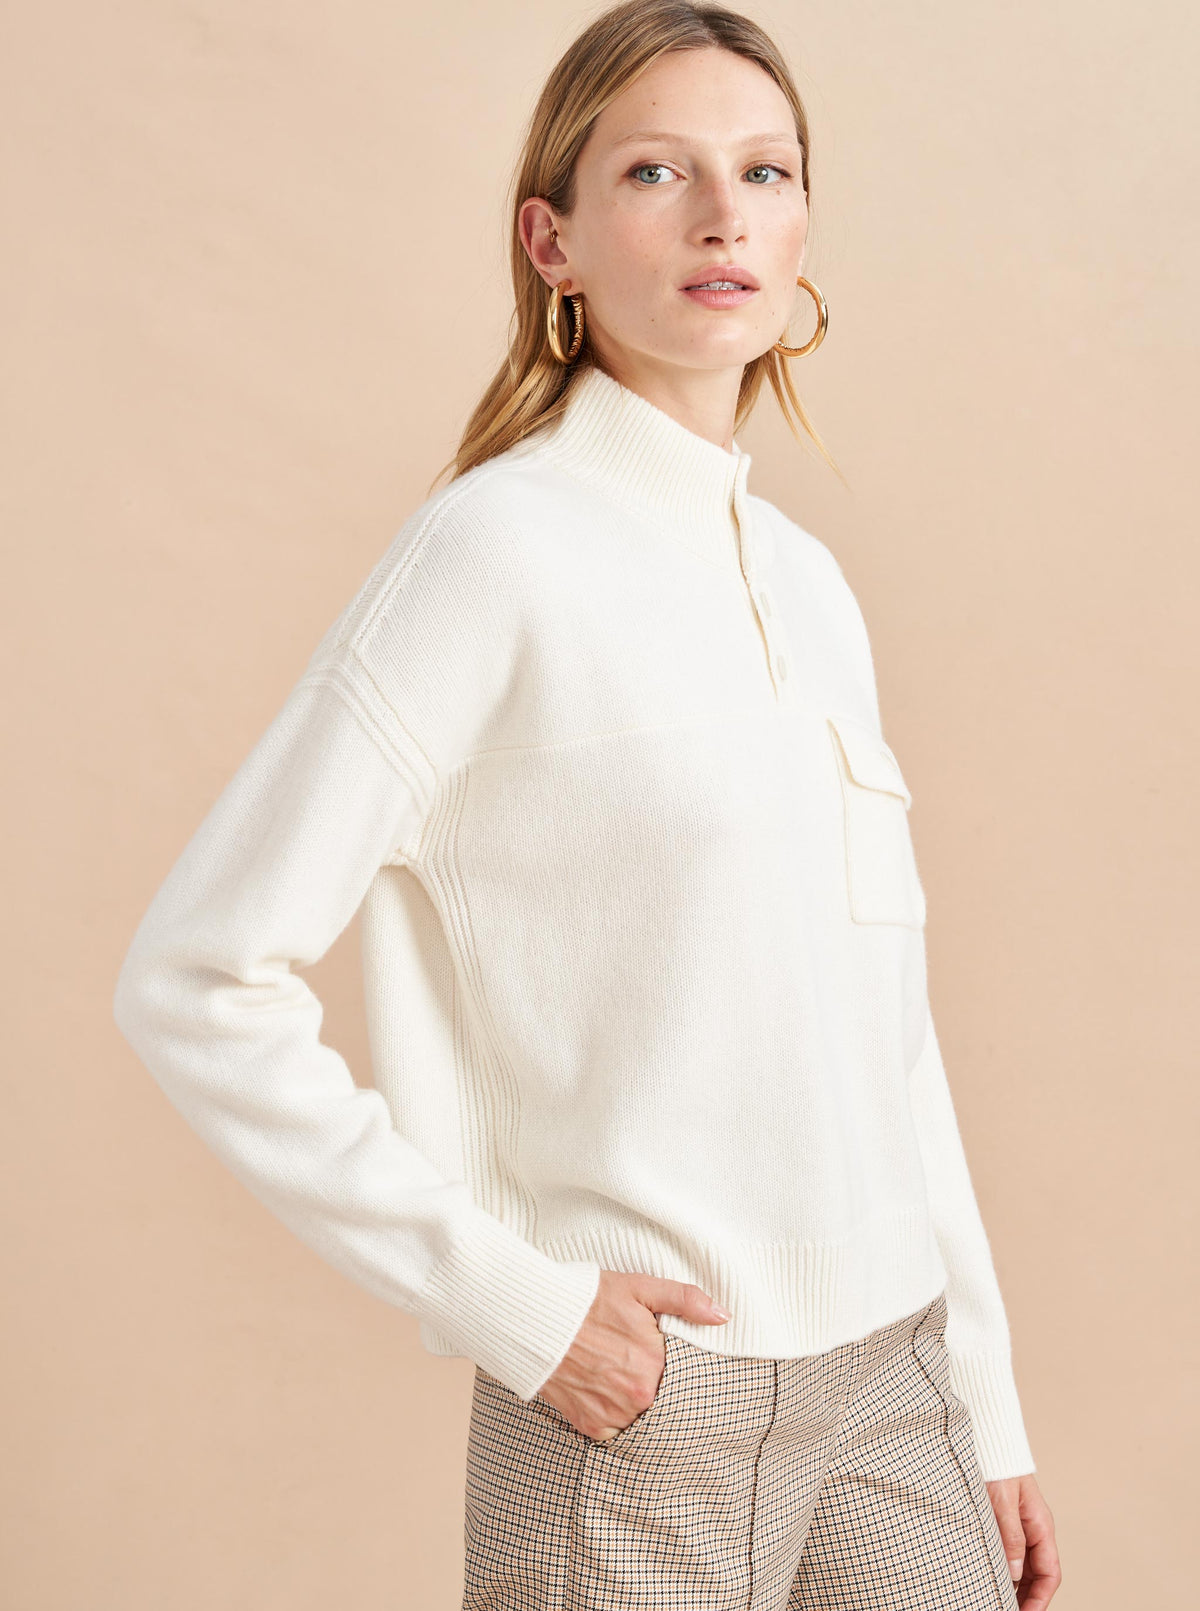 Clean and minimal, this sporty pullover is the perfect complement to one of our trousers if you add a sneaker or simply pop it over our denim for the ultimate no muss, no fuss attitude.